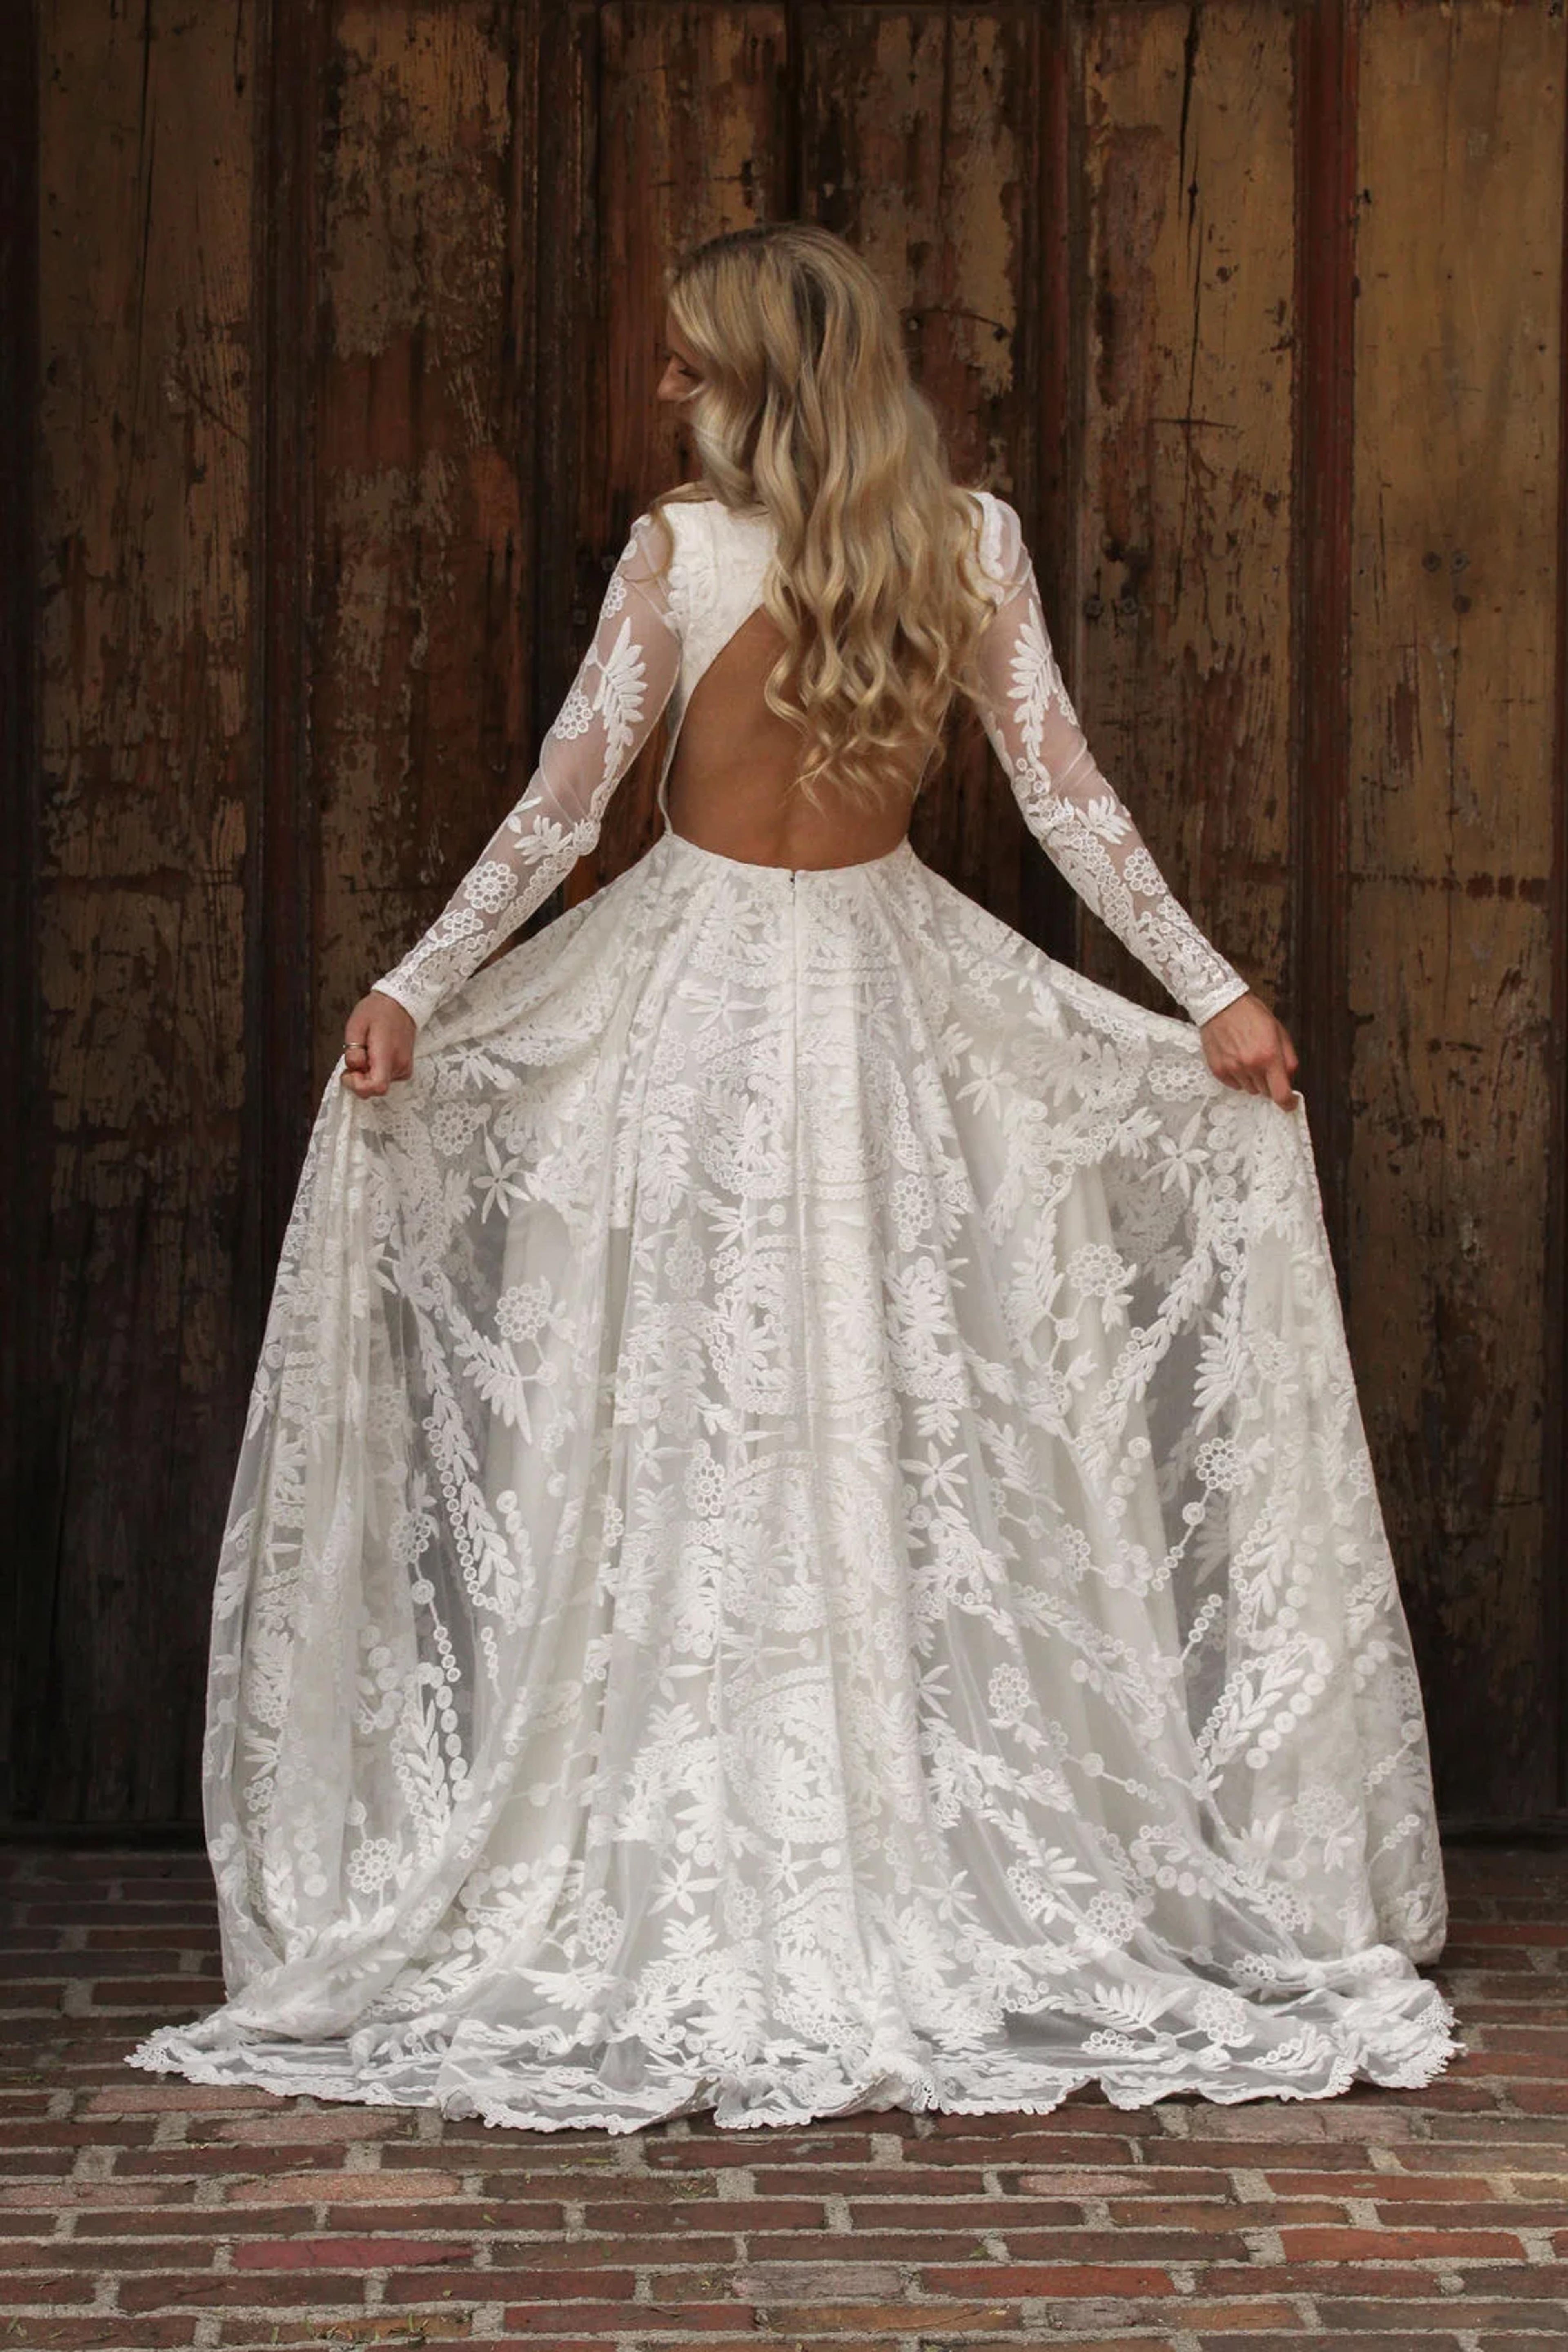 River Long Sleeve Lace Wedding Dress with Pockets